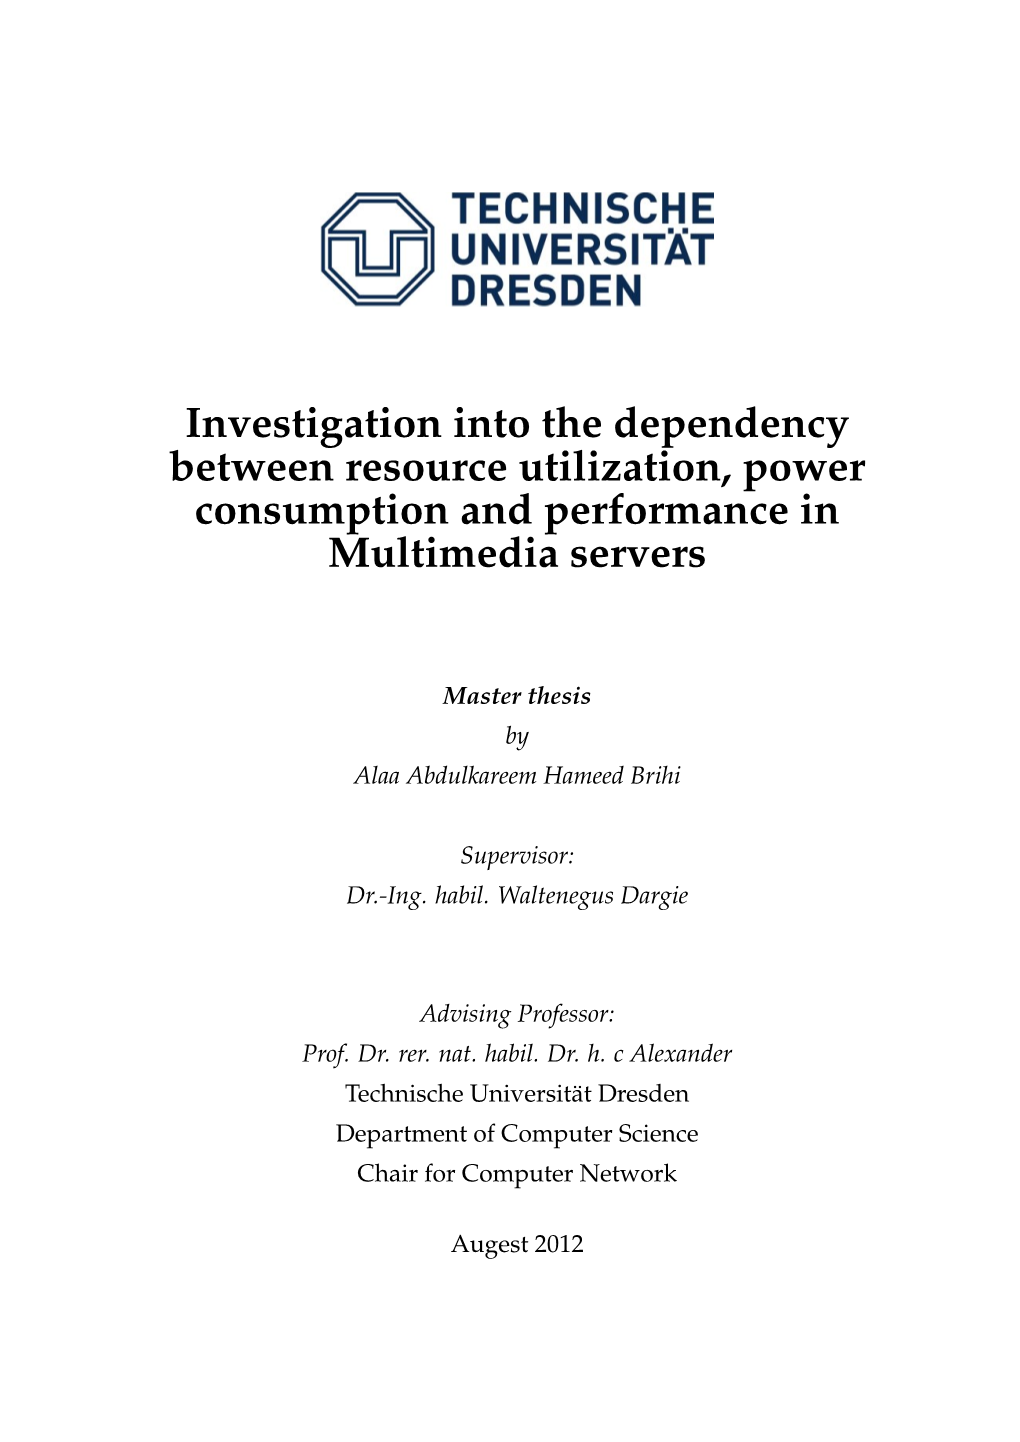 Investigation Into the Dependency Between Resource Utilization, Power Consumption and Performance in Multimedia Servers